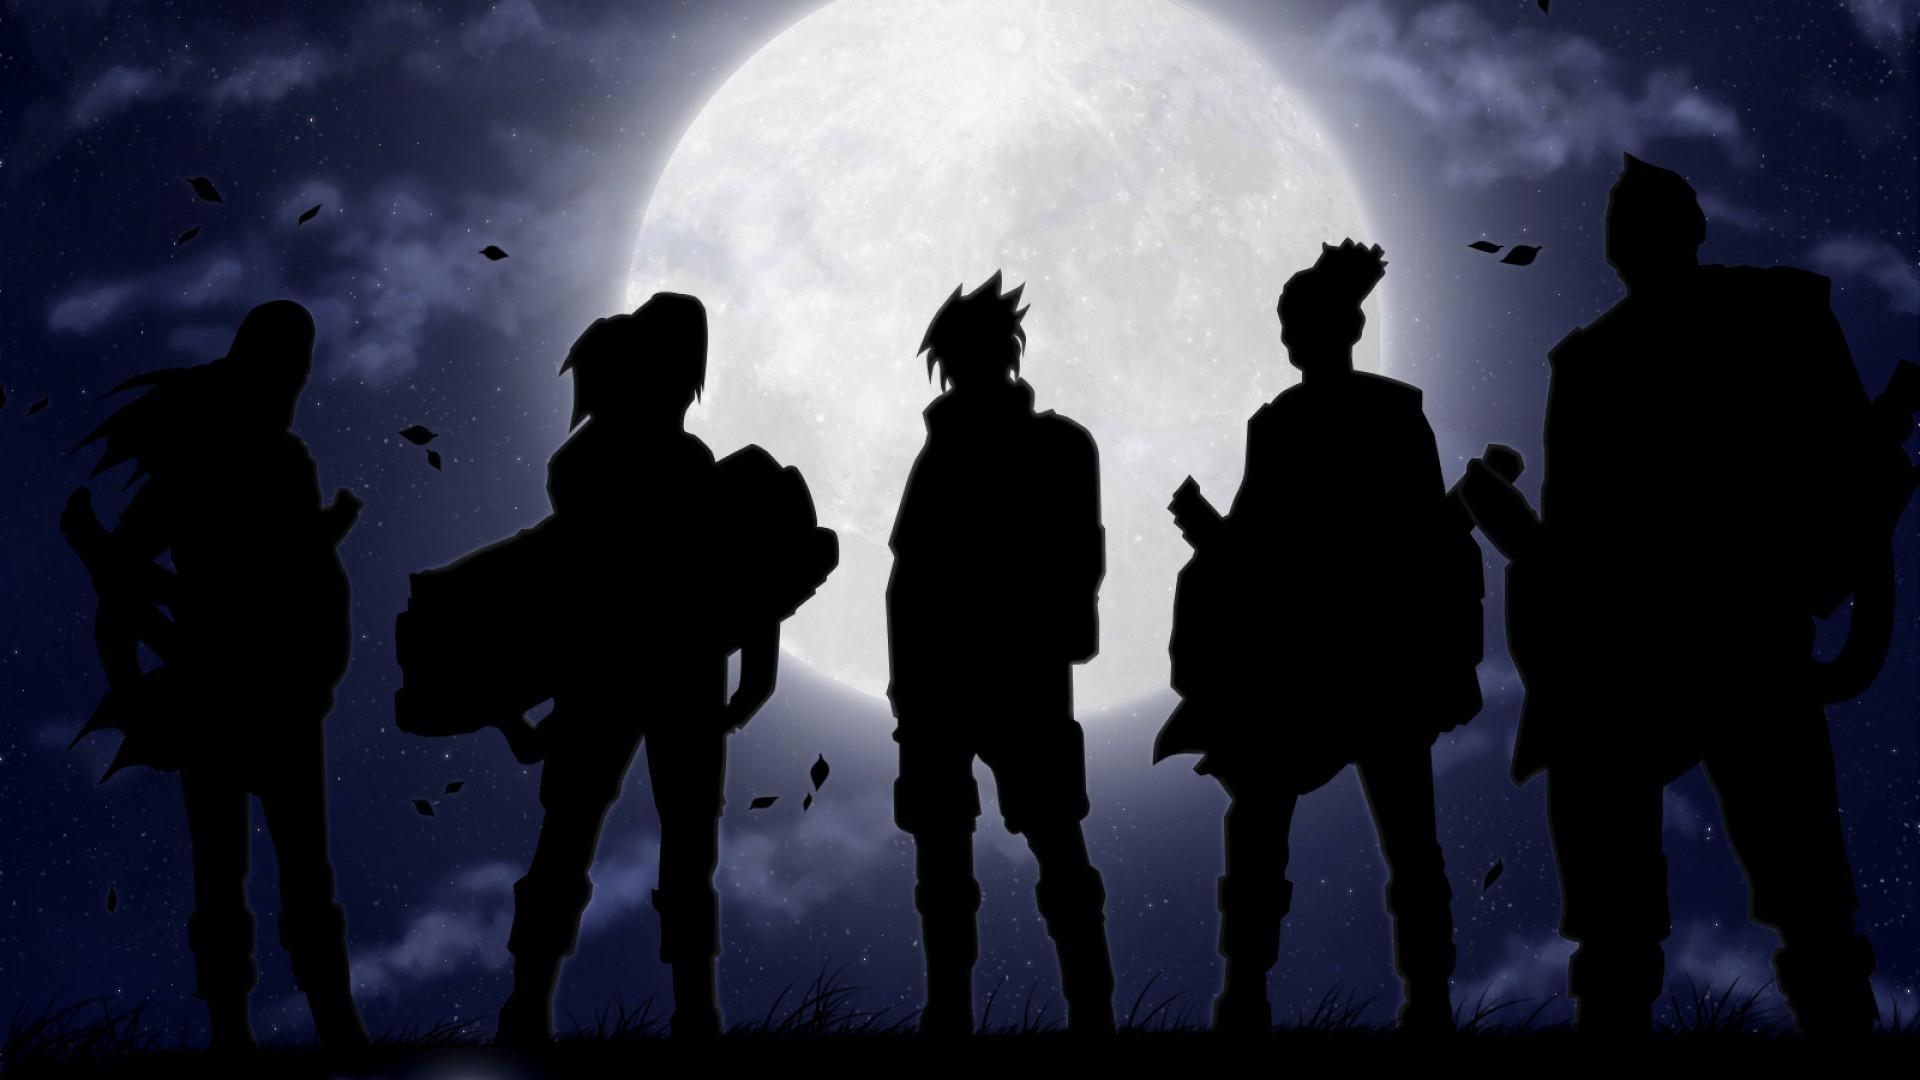 New Naruto Wallpaper background picture